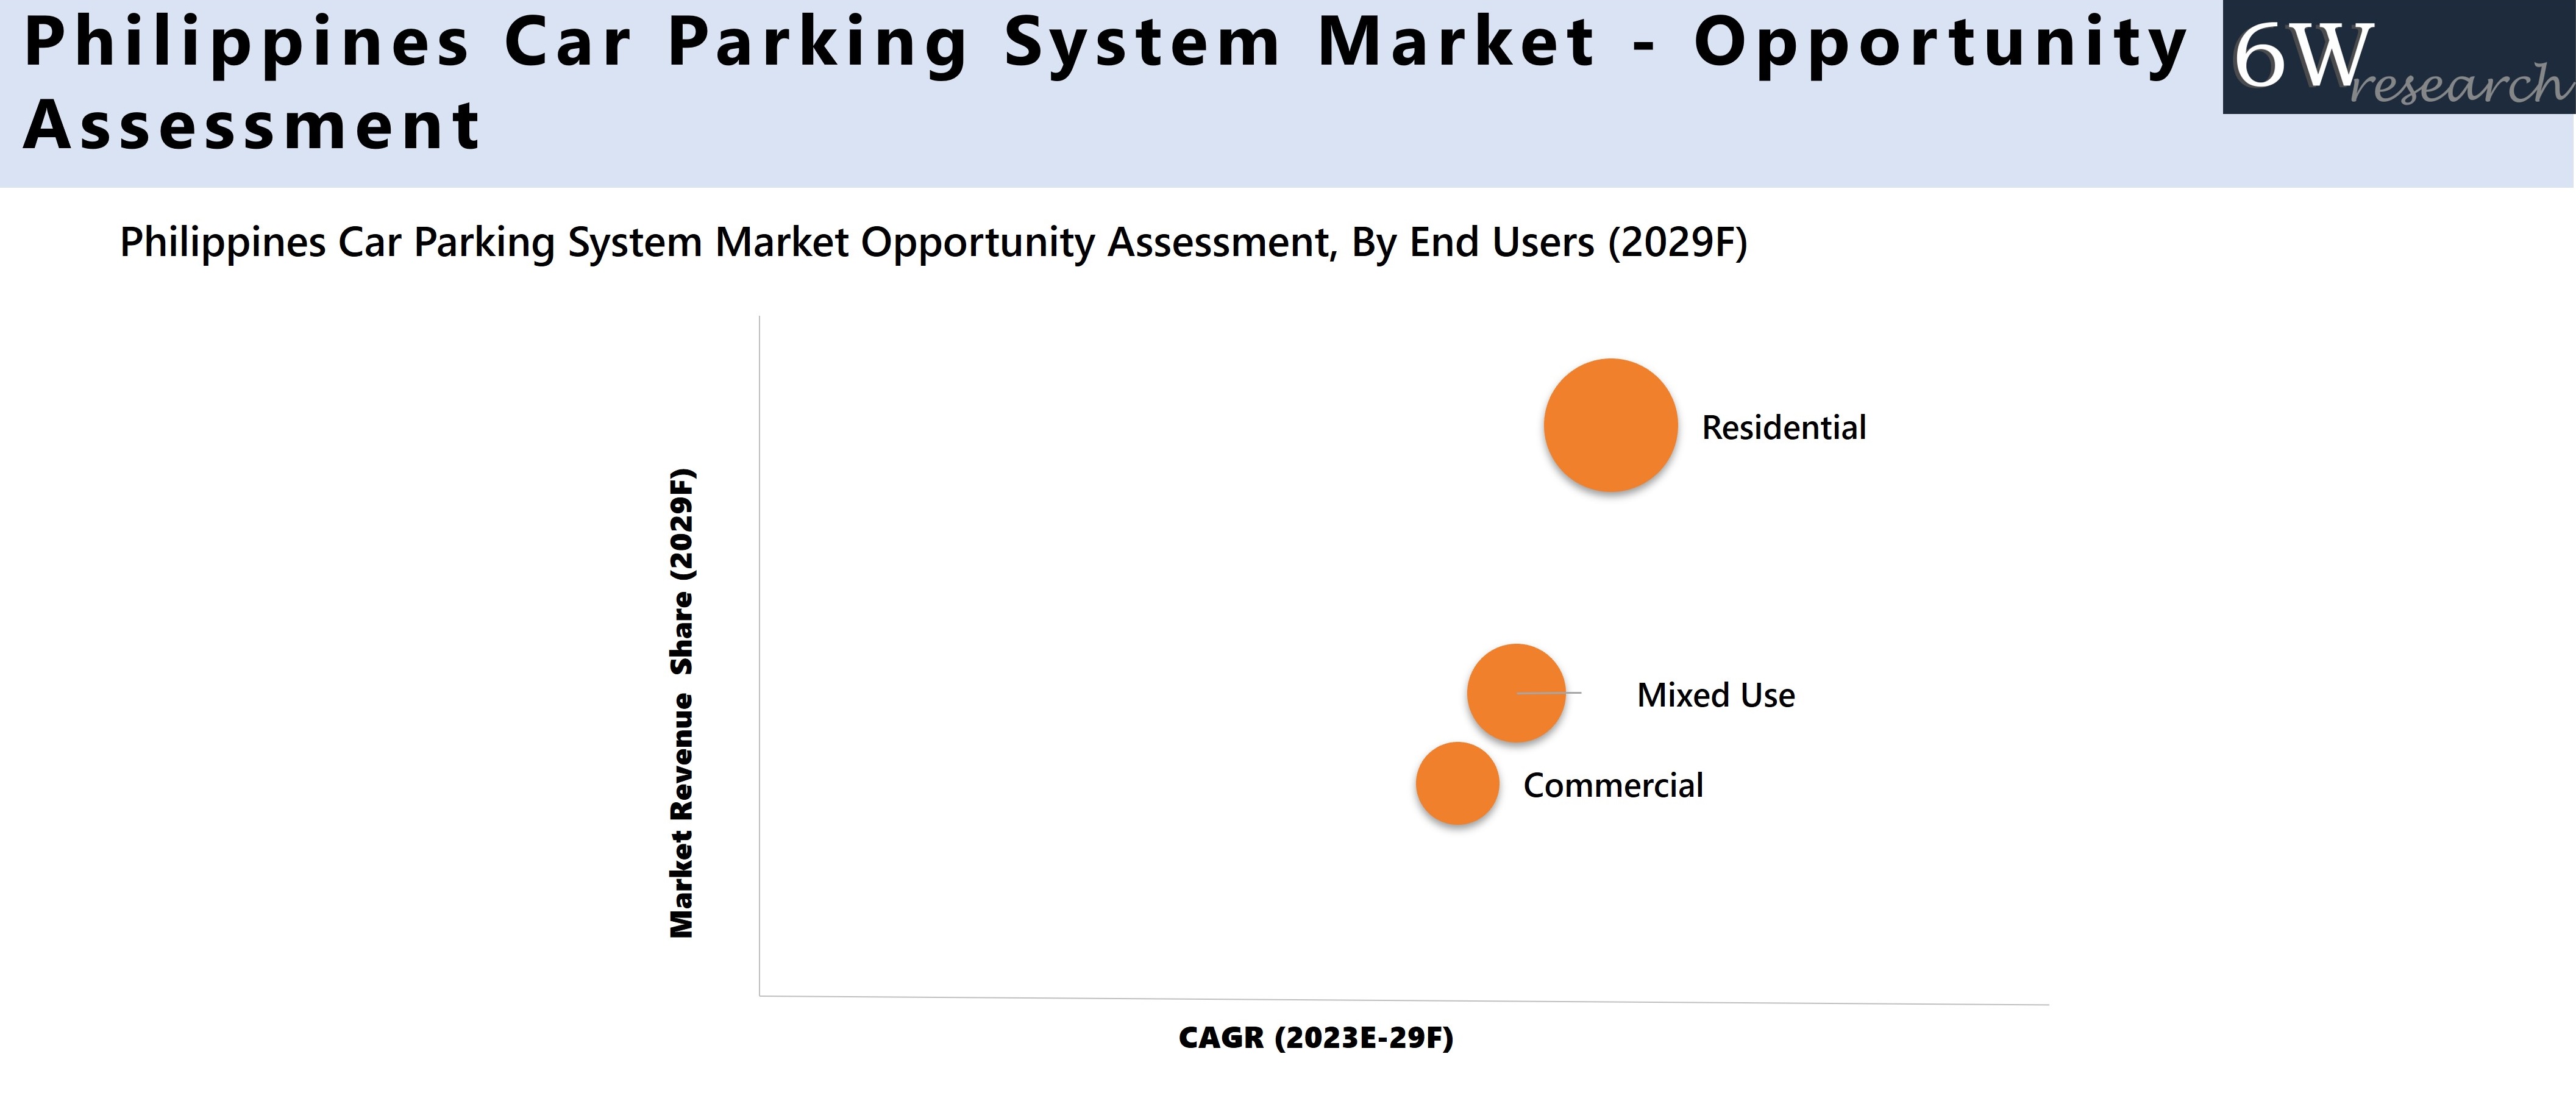 Philippines Car Parking System Market Opportunity Assessment